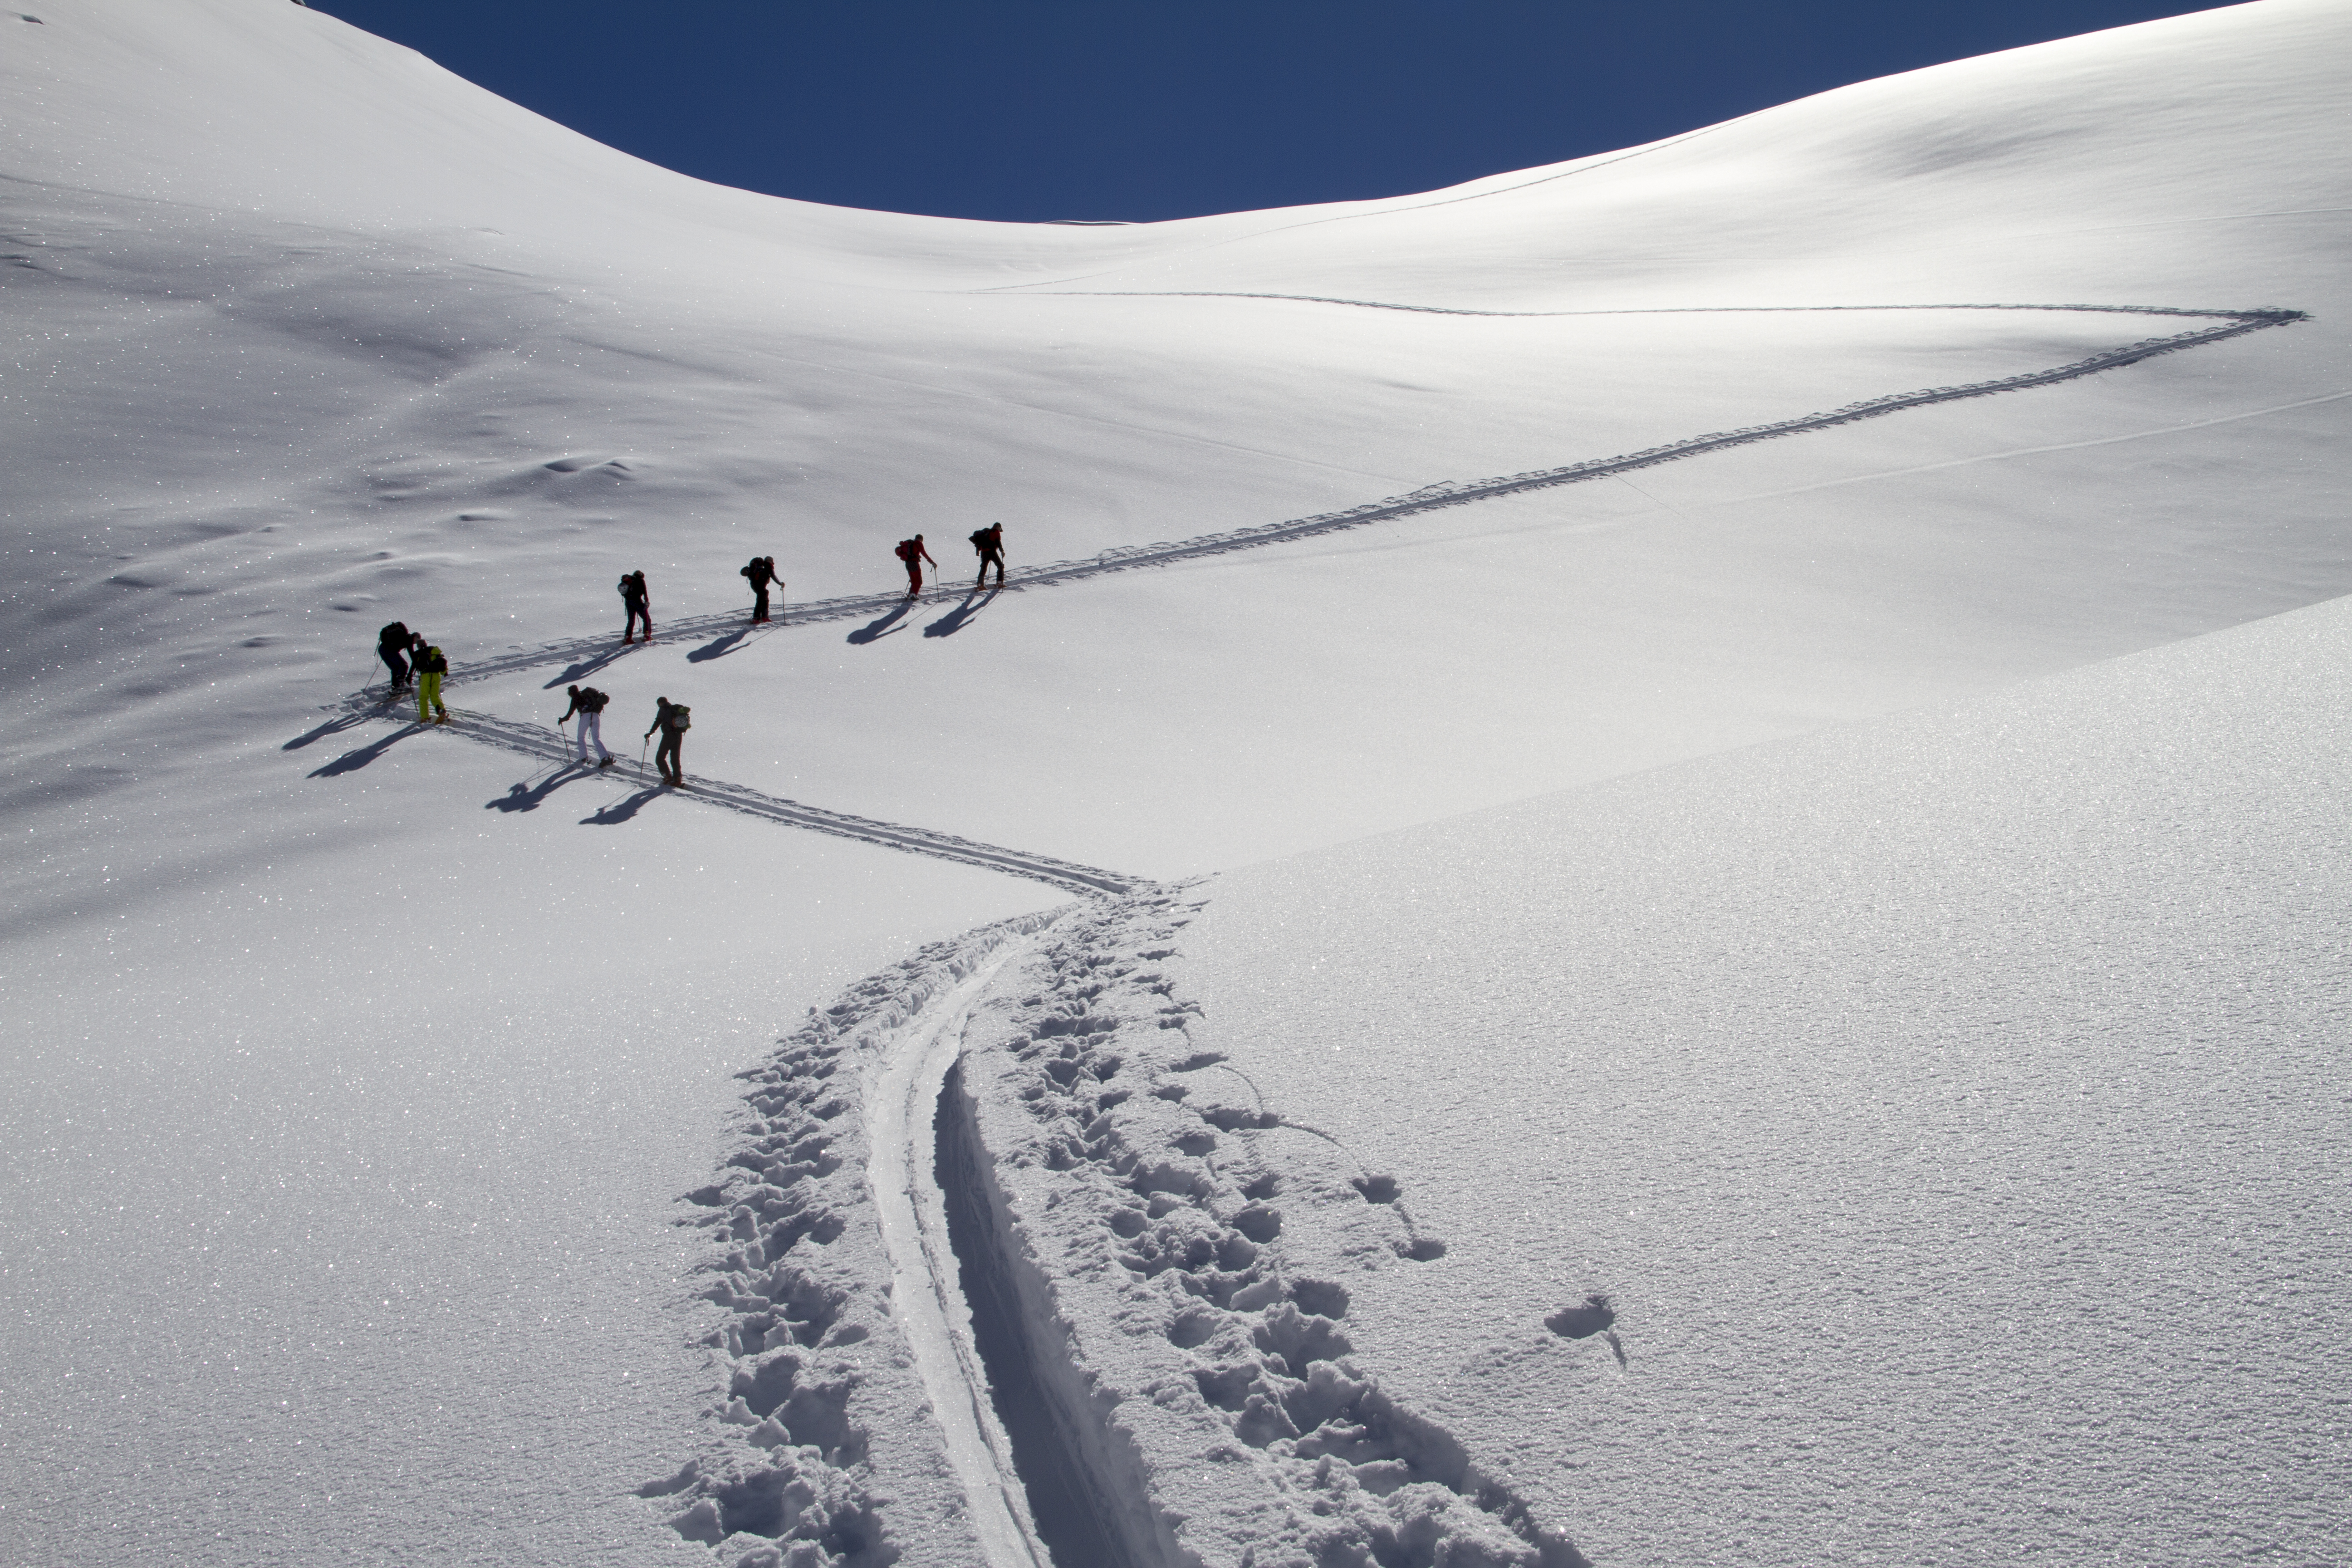 Breaking trail in powder snow. . Photo: Andreas Bengtsson